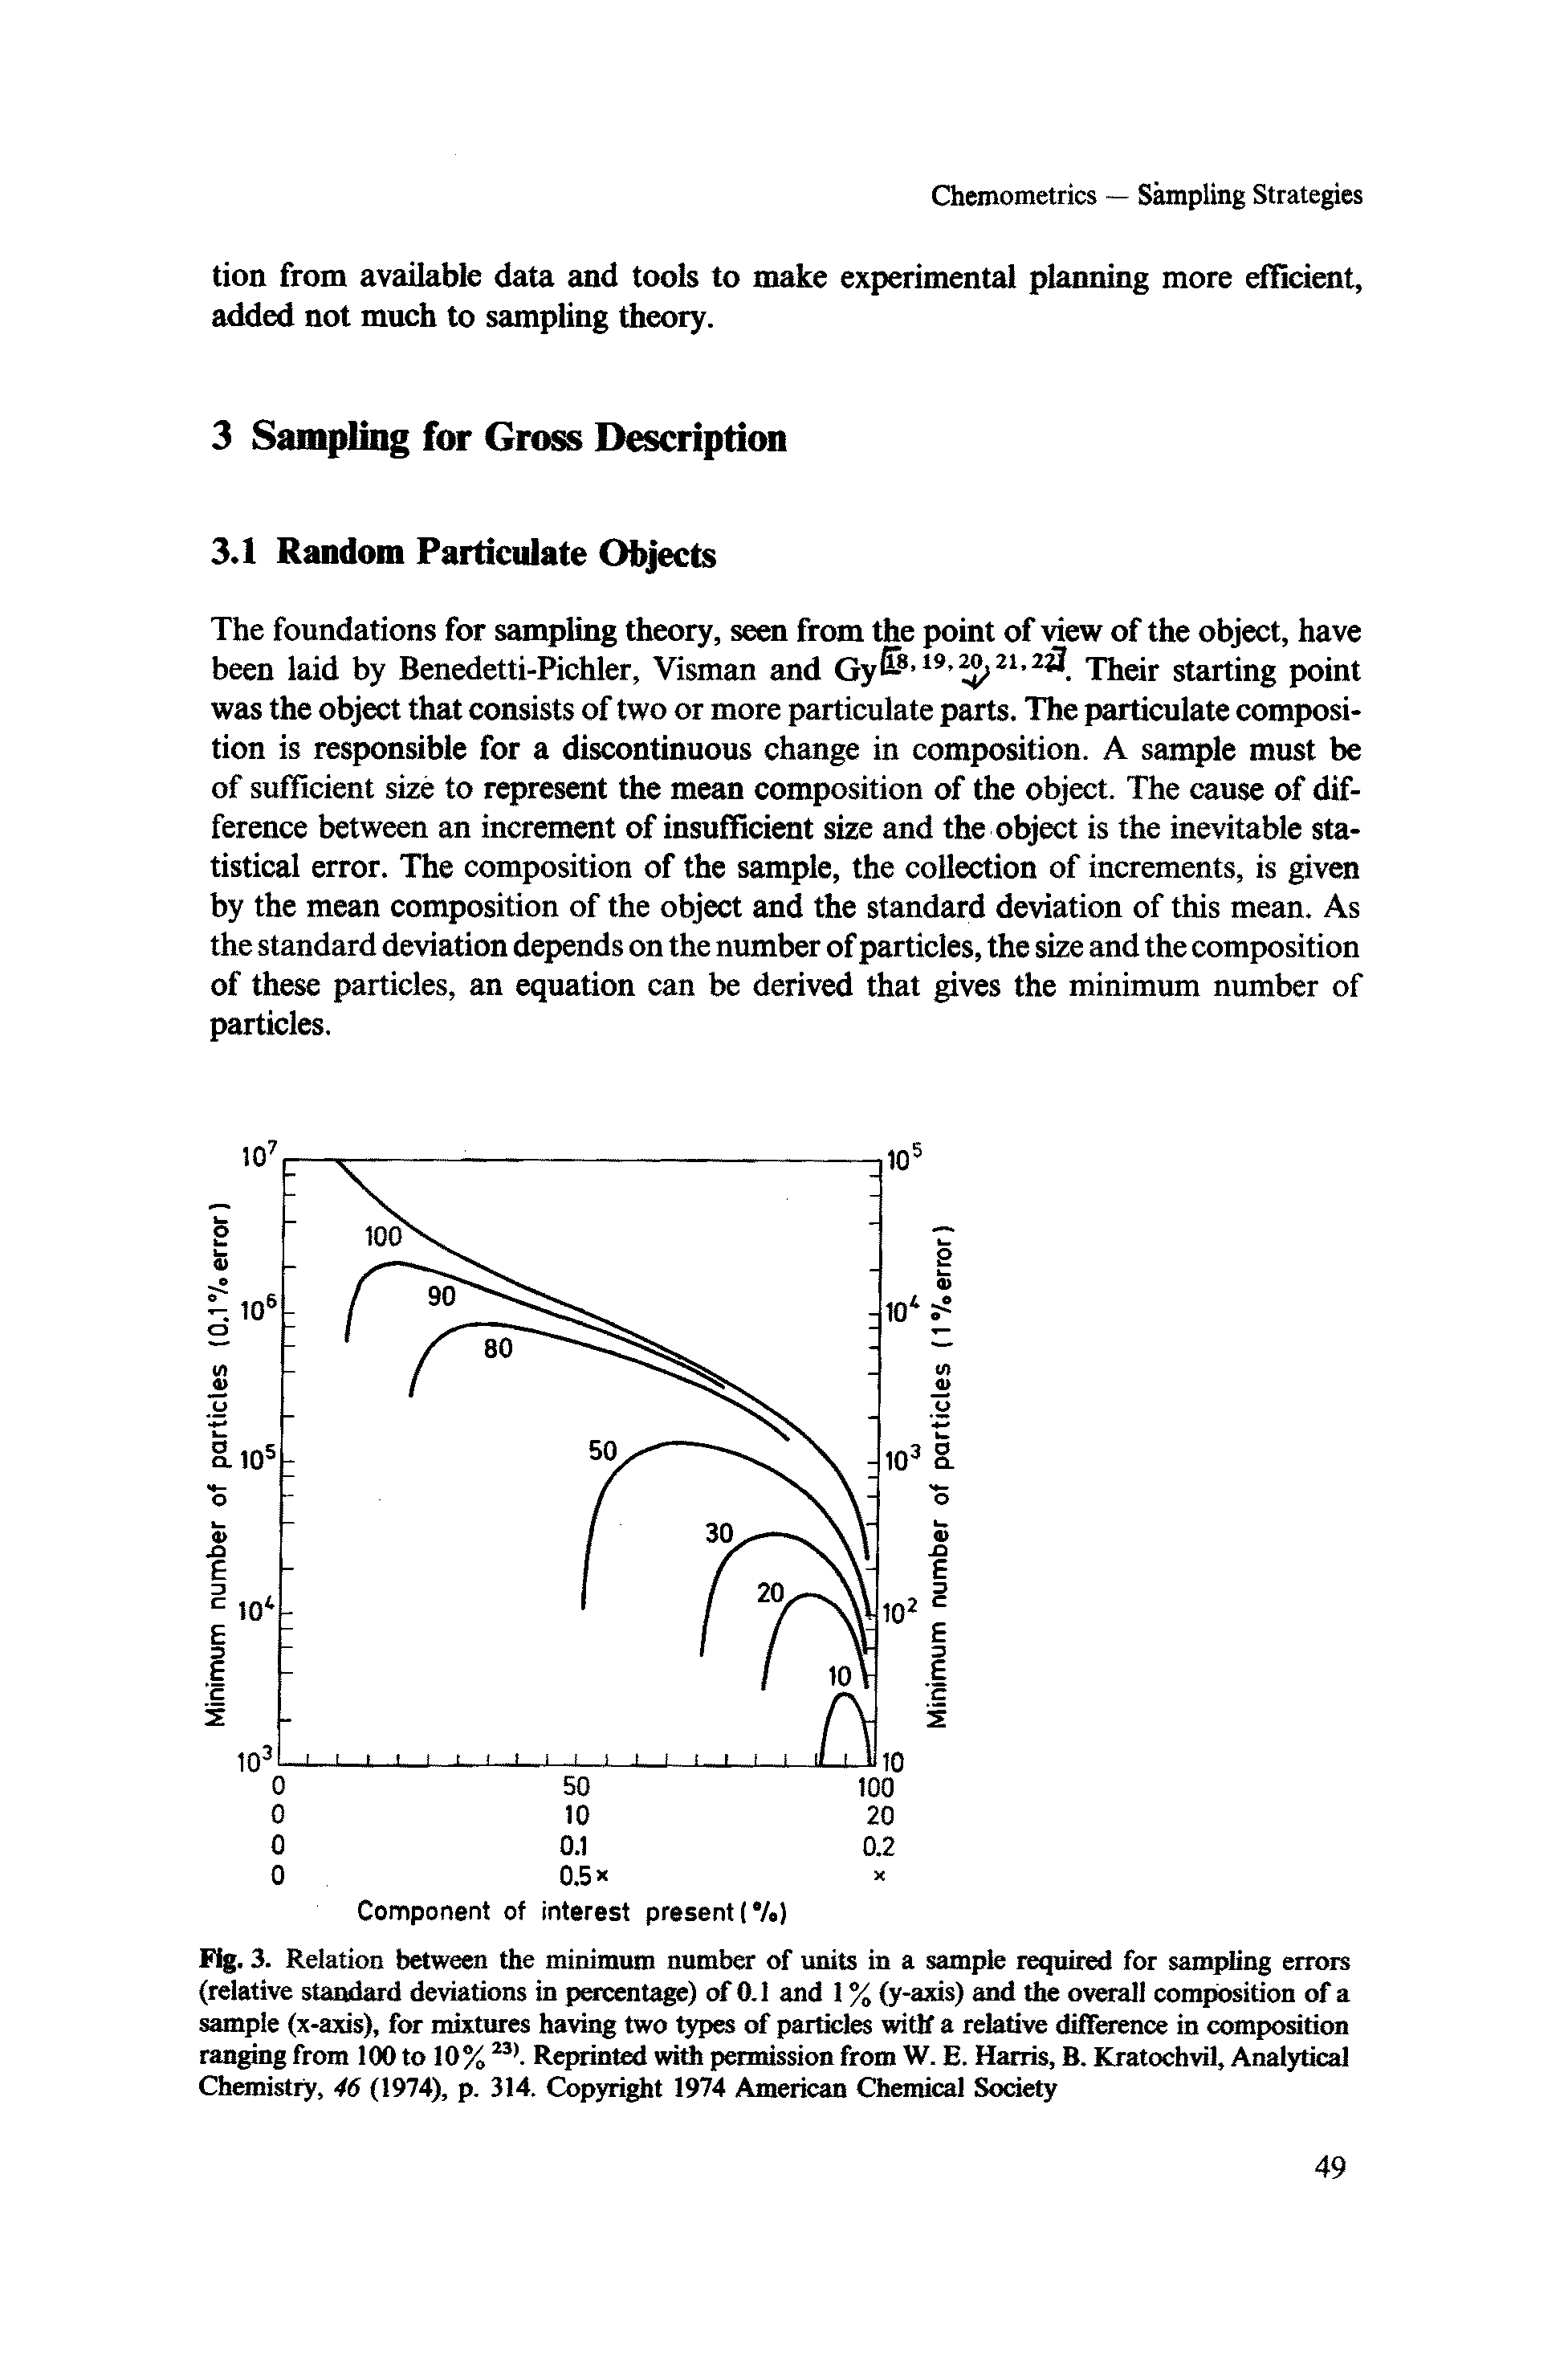 Fig. 3. Relation between the minimum number of units in a sample require for sampling errore (relative standard deviations in percentage) of 0.1 and 1 % (y-axis) and the overall composition of a sample (x-axis), for mixtures having two types of particles with a relative difference in composition ranging from 100 to 10% Reprinted wiA permission from W. E. Harris, B. Kratochvil, Analytical Chemistry, 46 (1974), p. 314. Copyright 1974 American Chemical Society...